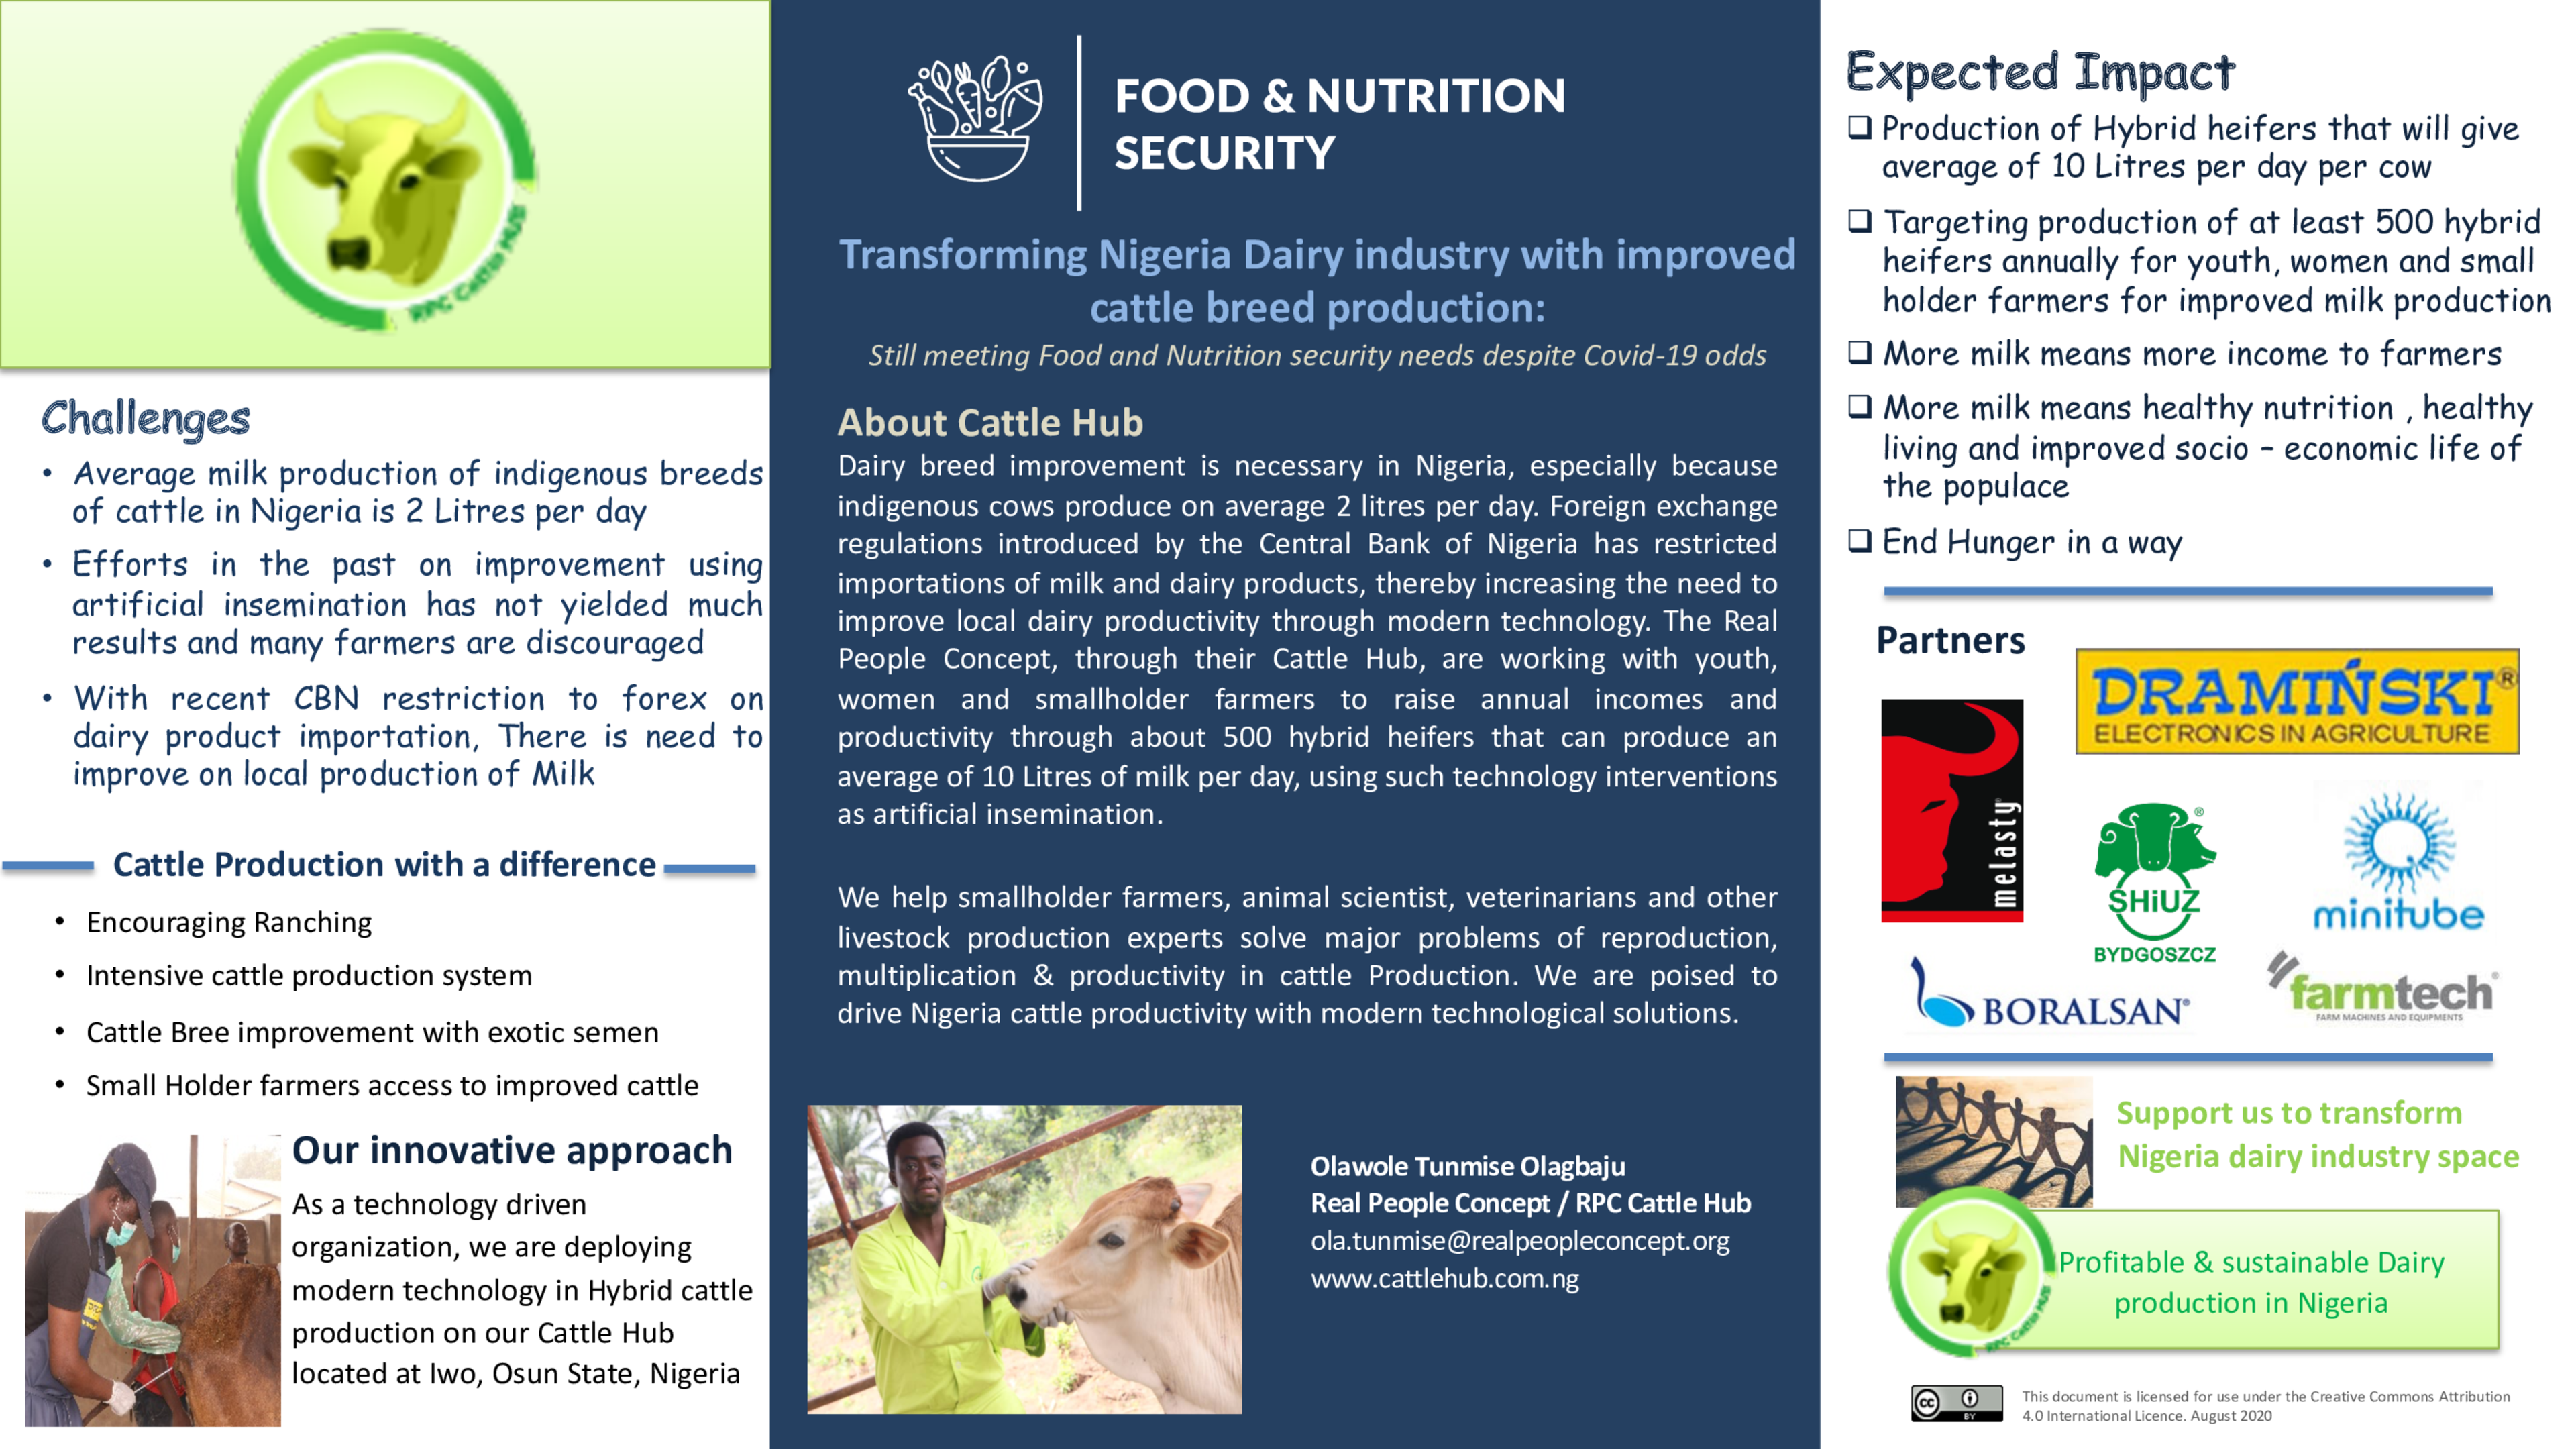 Transforming Dairy industry in Nigeria with improved cattle breed production: Still meeting Food and Nutrition security needs despite Covid-19 odds